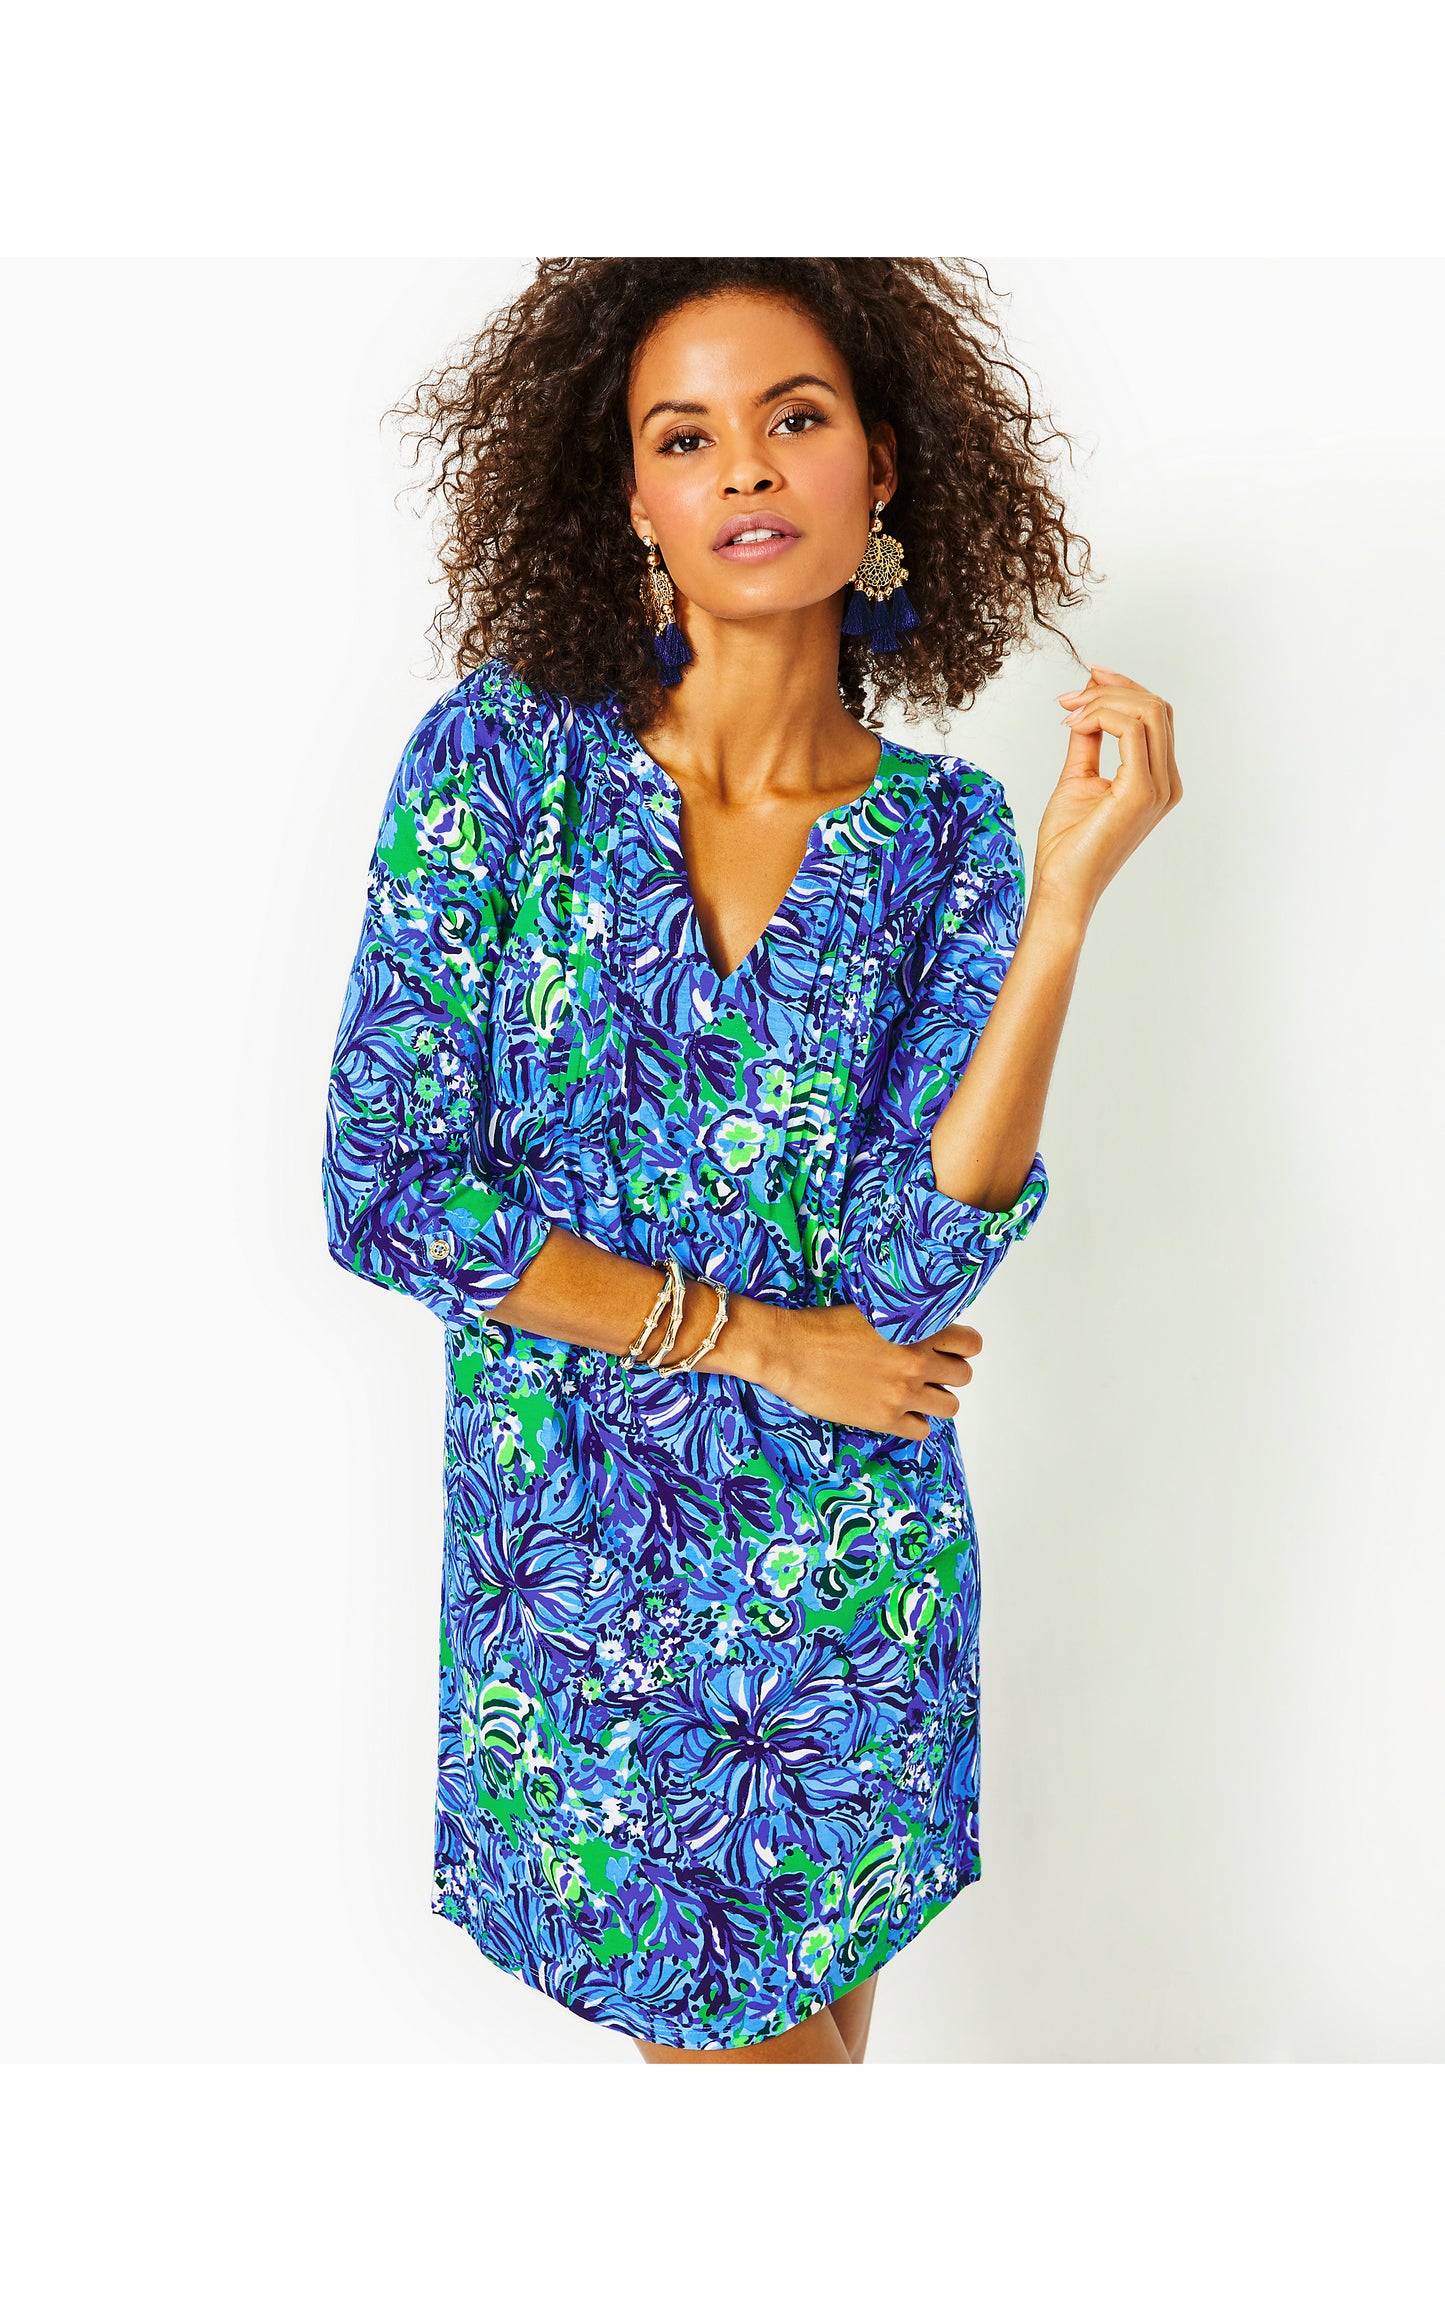 Load image into Gallery viewer, Fairfax 3/4 Sleeve Dress
